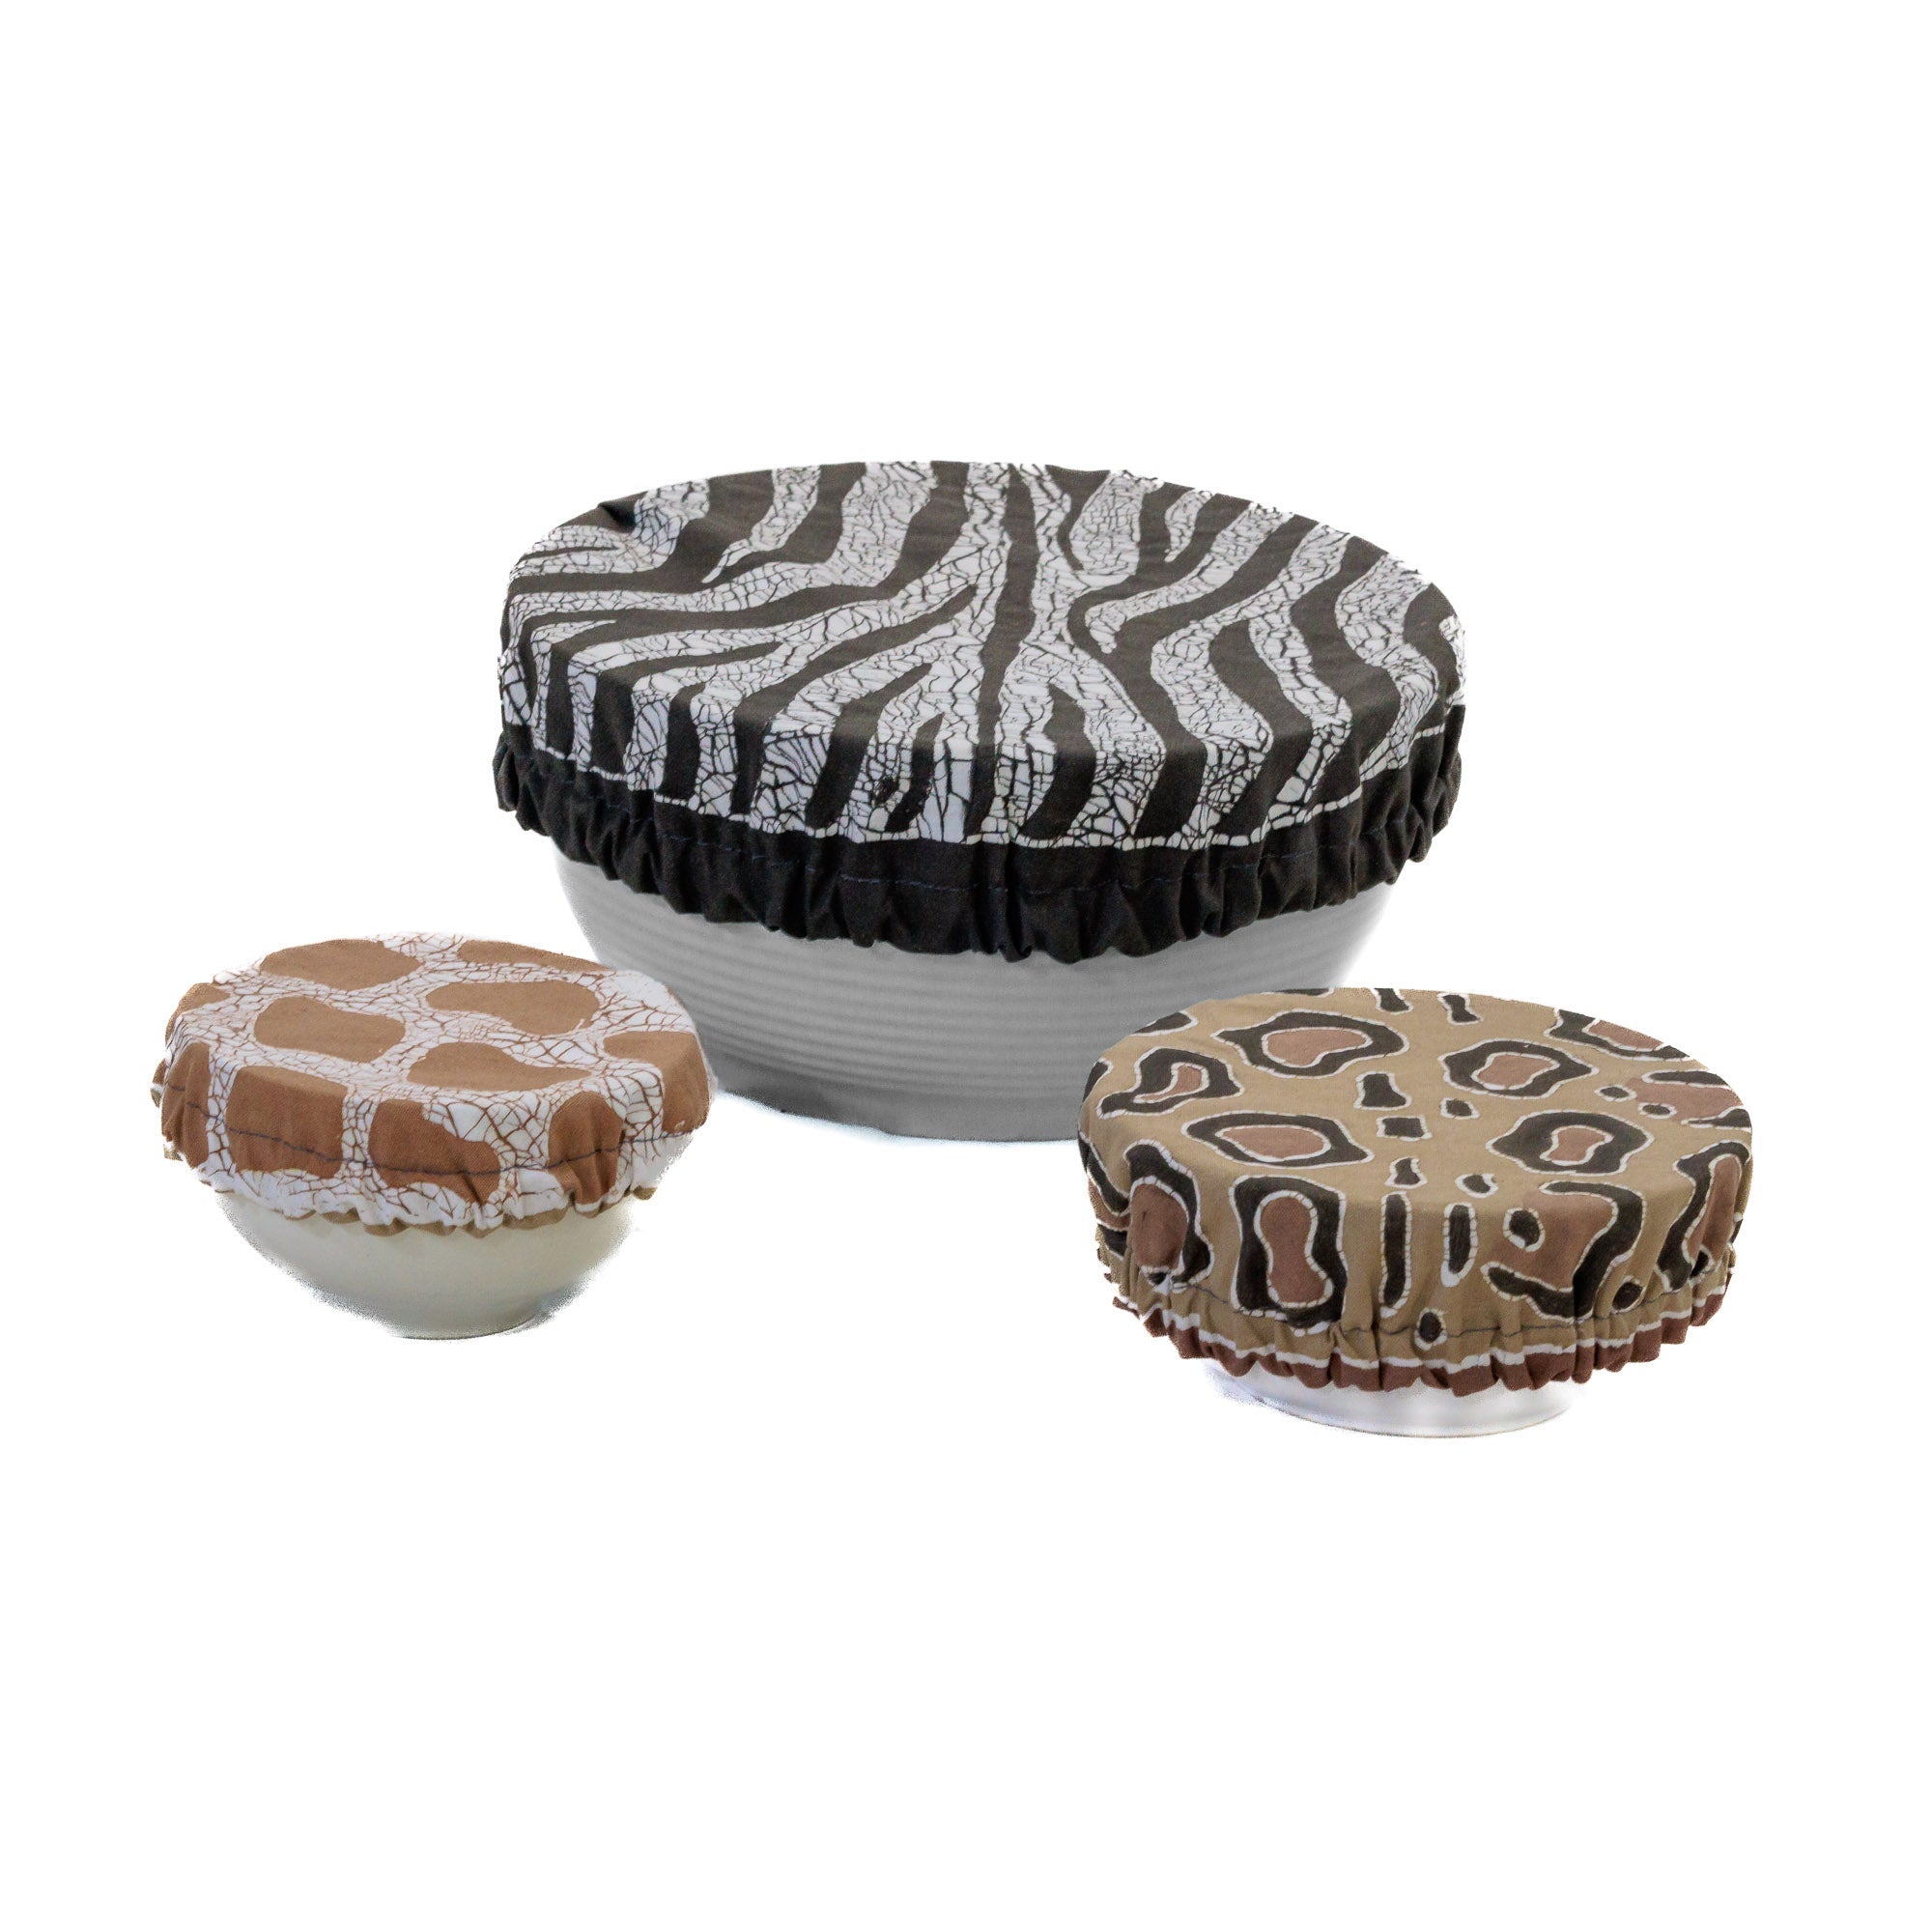 Reusable food bowl covers made in organic cotton with african animal pattern print